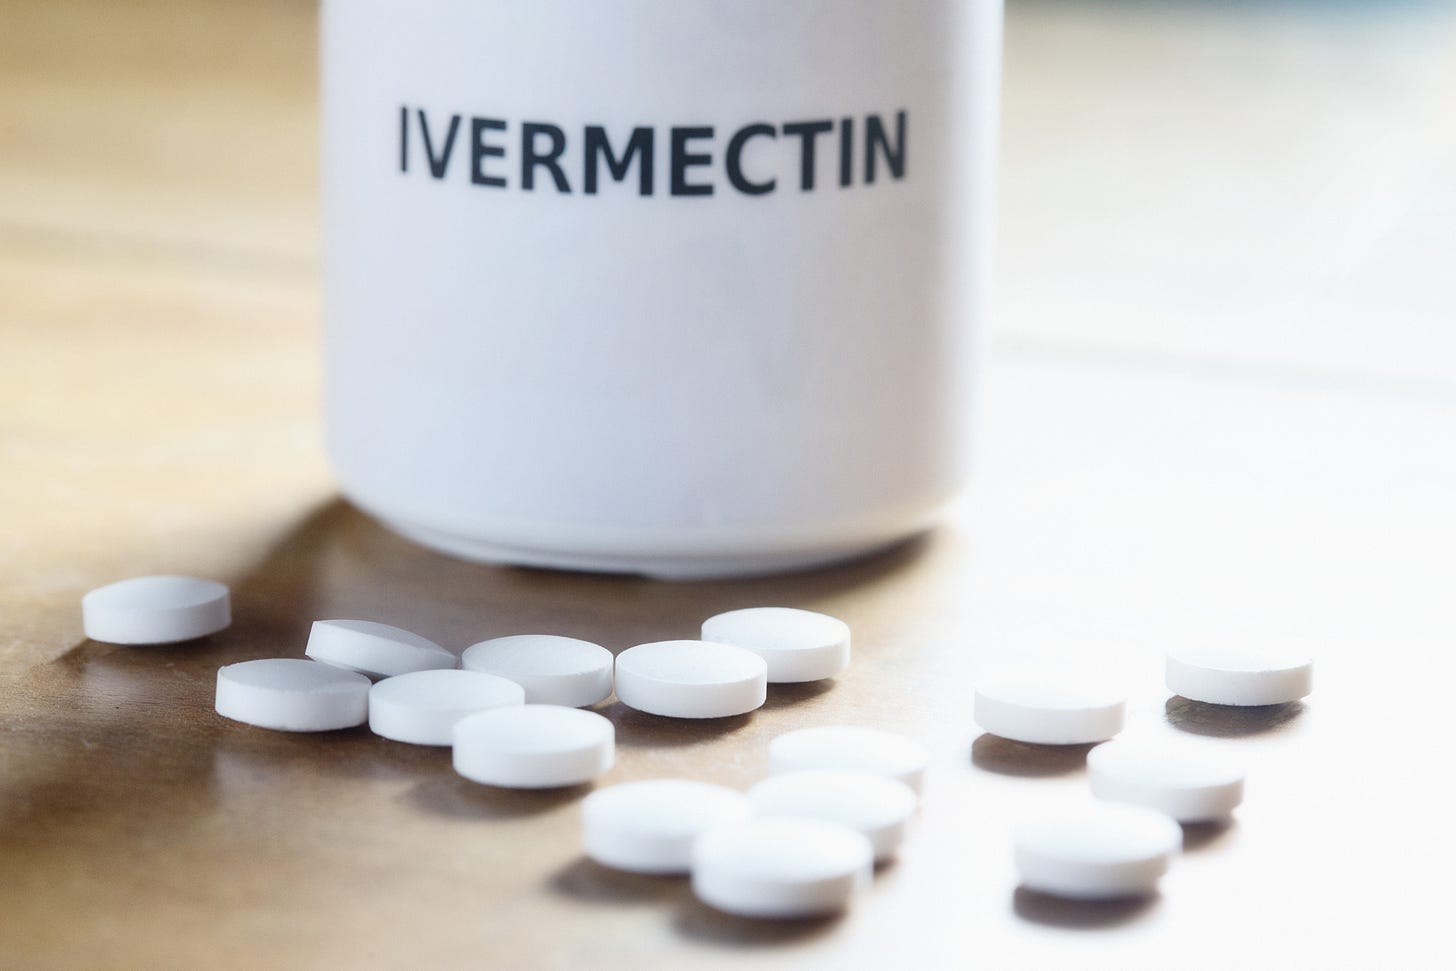 Five Oregonians hospitalized due to misuse of ivermectin for COVID-19 |  OHSU News